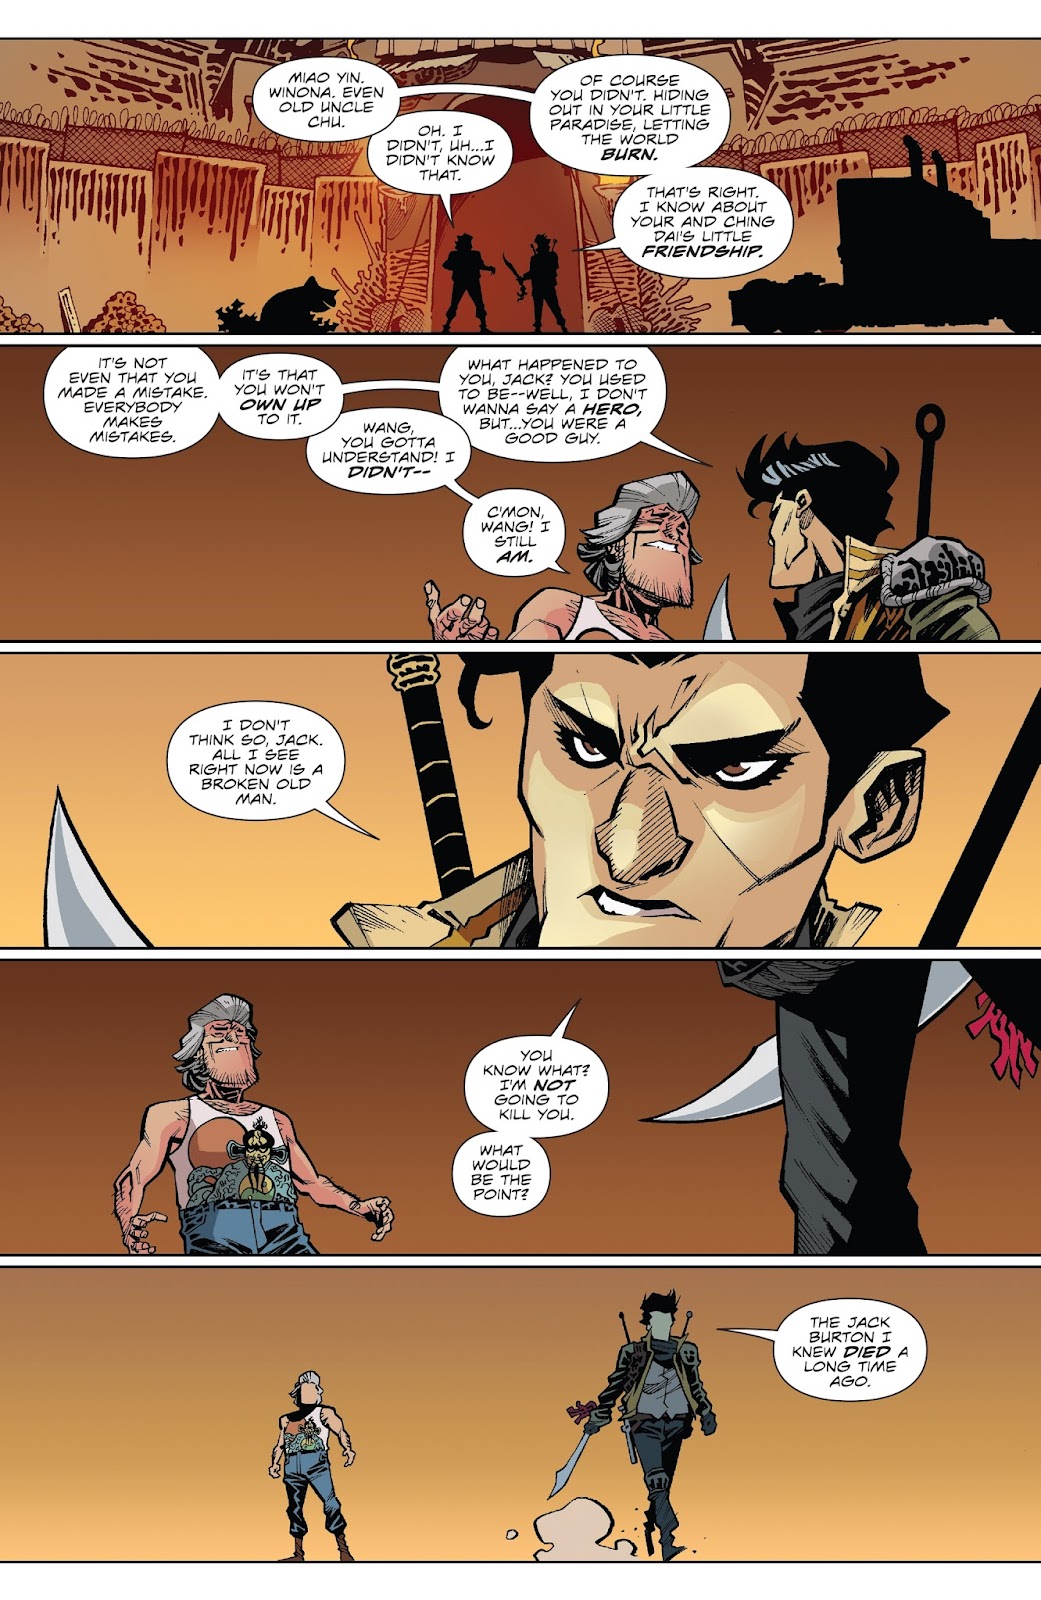 Big Trouble in Little China: Old Man Jack issue 4 - Page 18